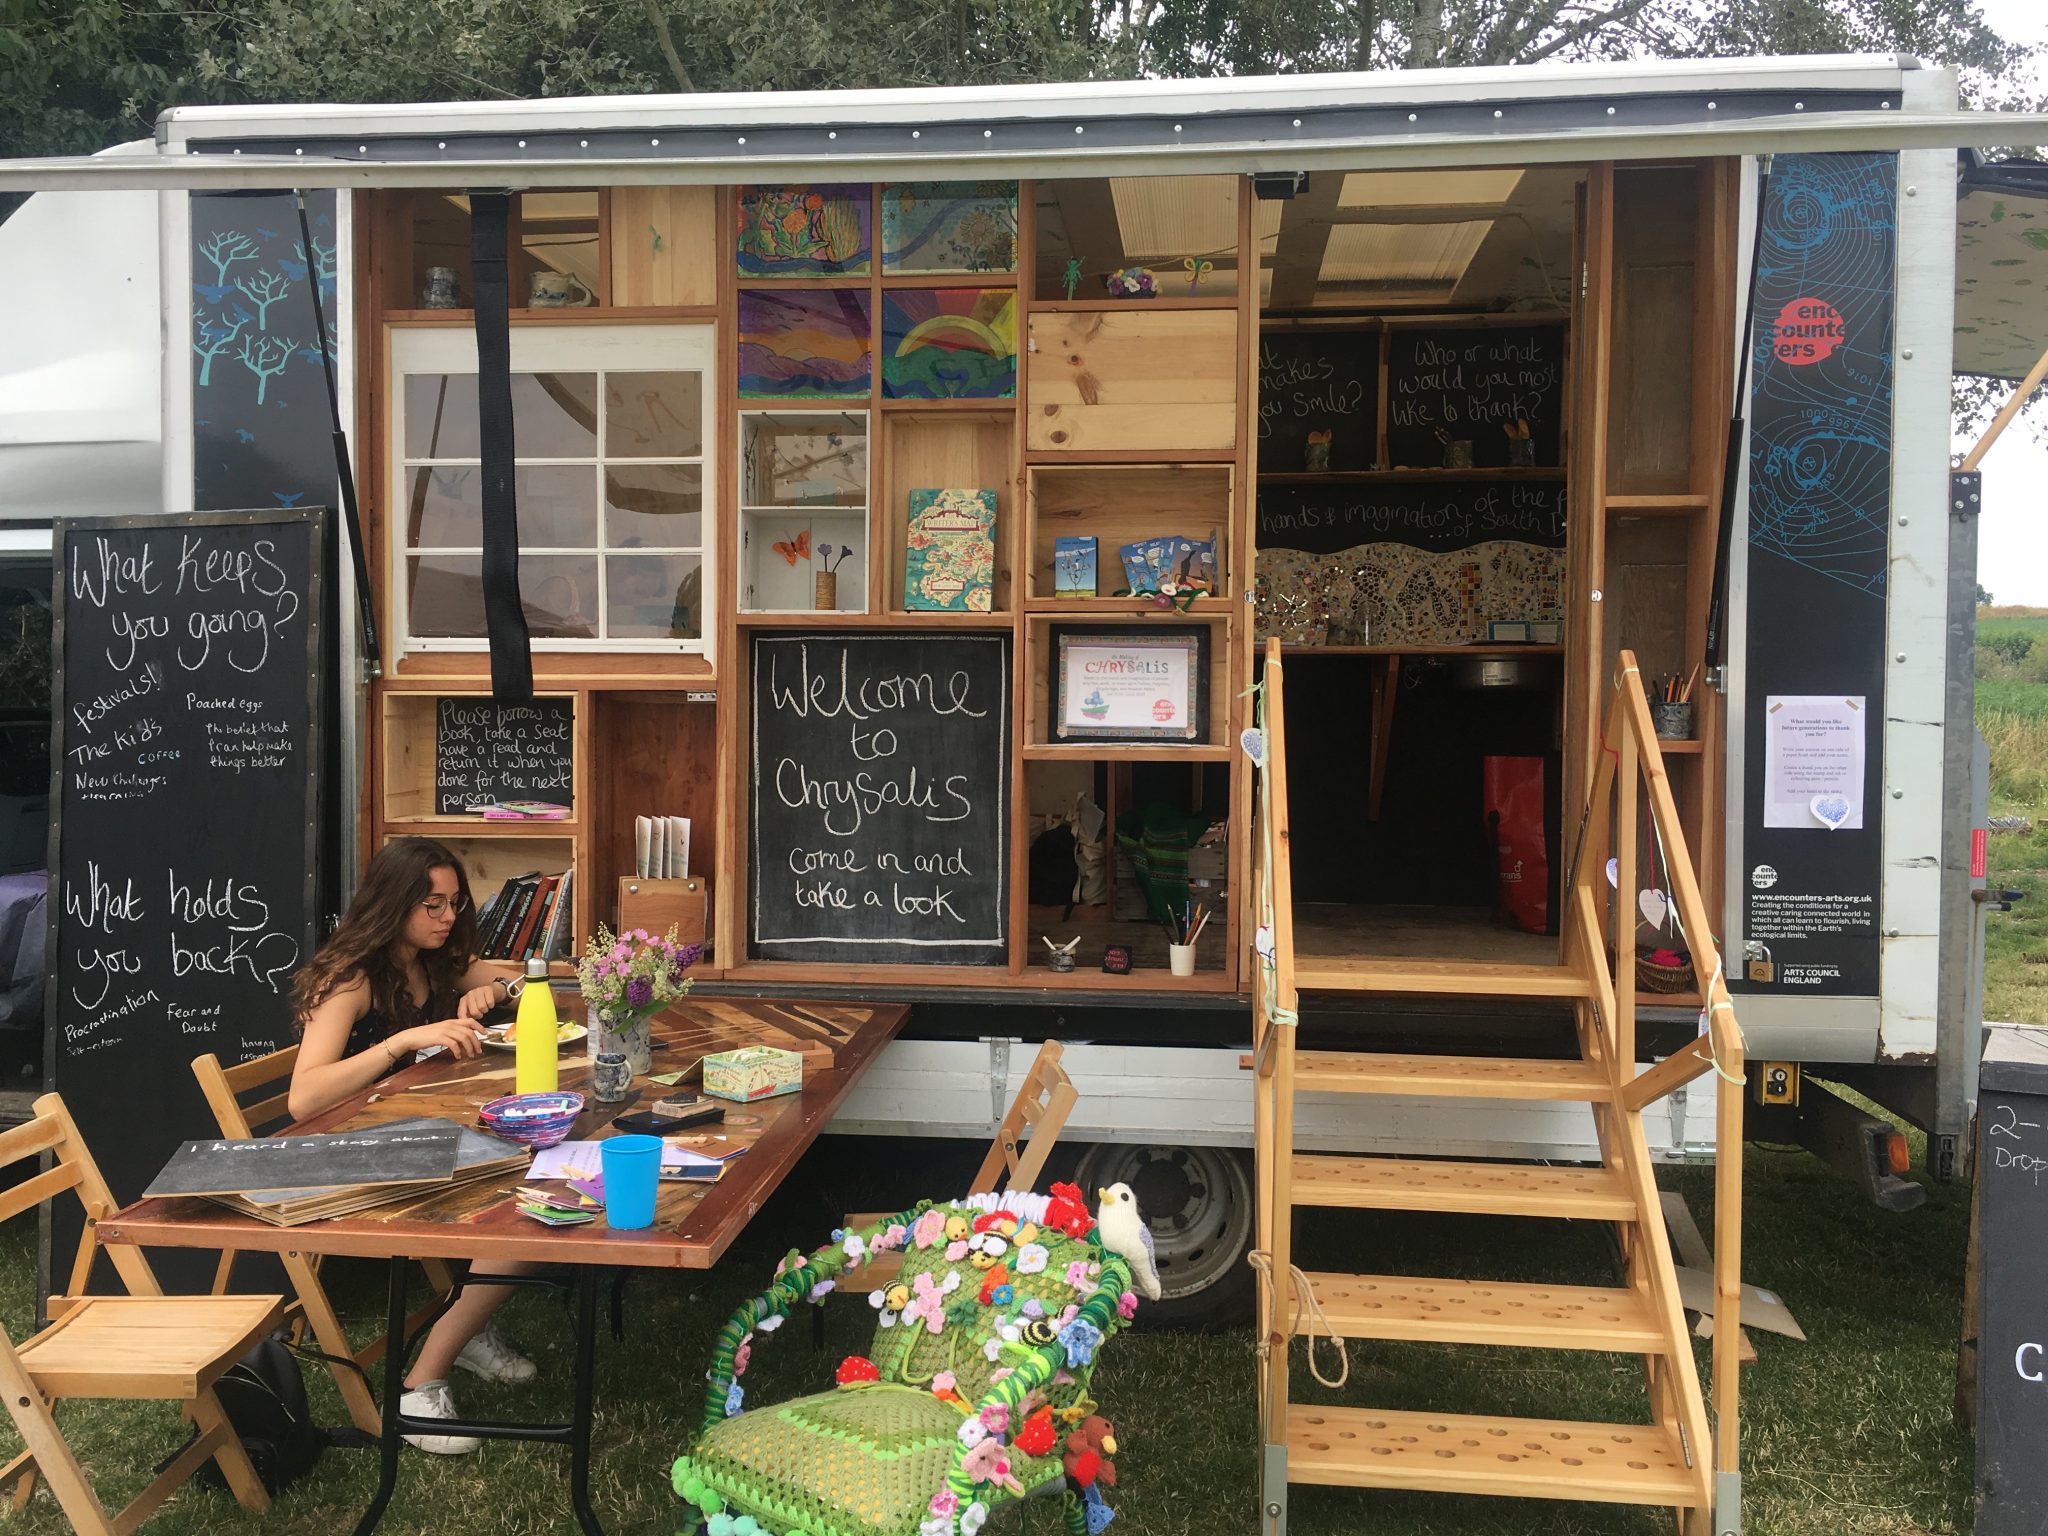 A small truck has been converted into a creative engagement space, with books, art, materials and questions on blackboards to prompt sharing and discussion. 